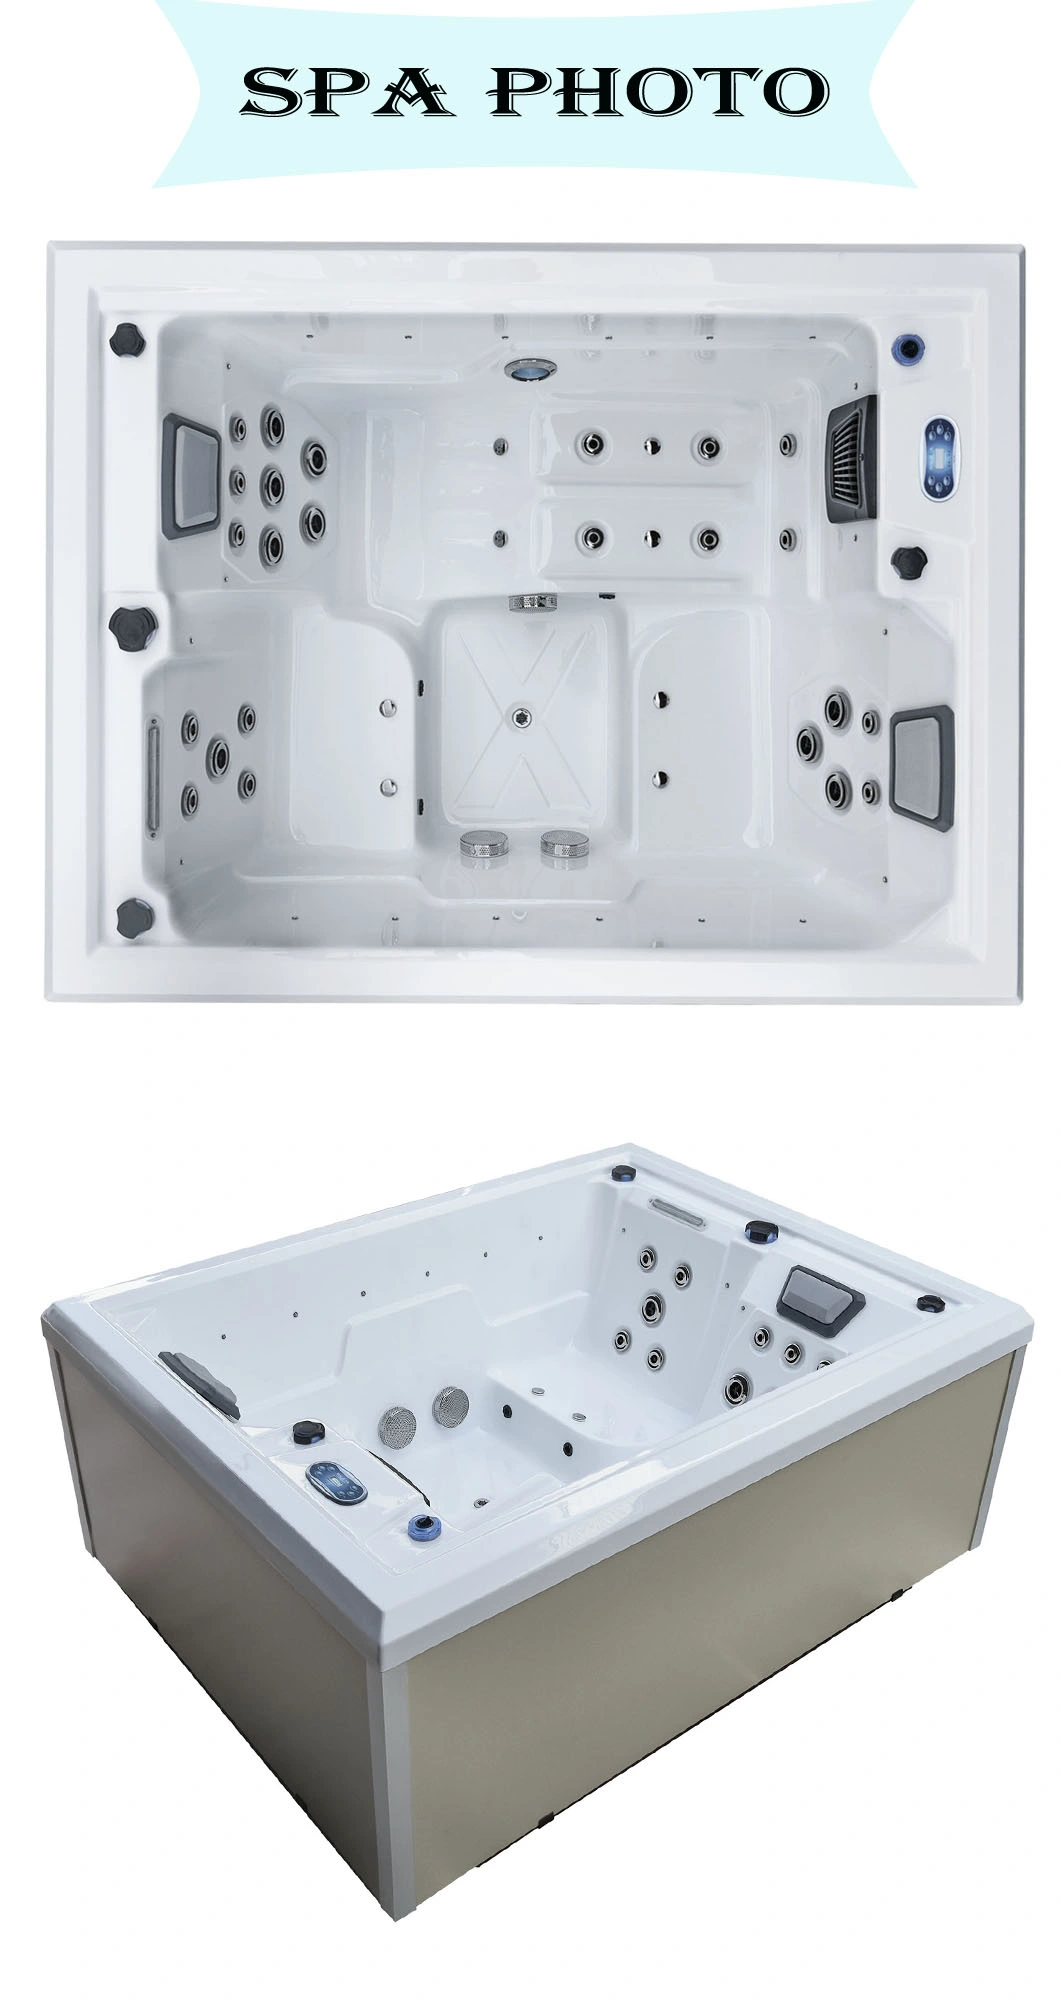 Bluewater SPA Jetted Whrilpool Jacuzzi Bathtub with Lights